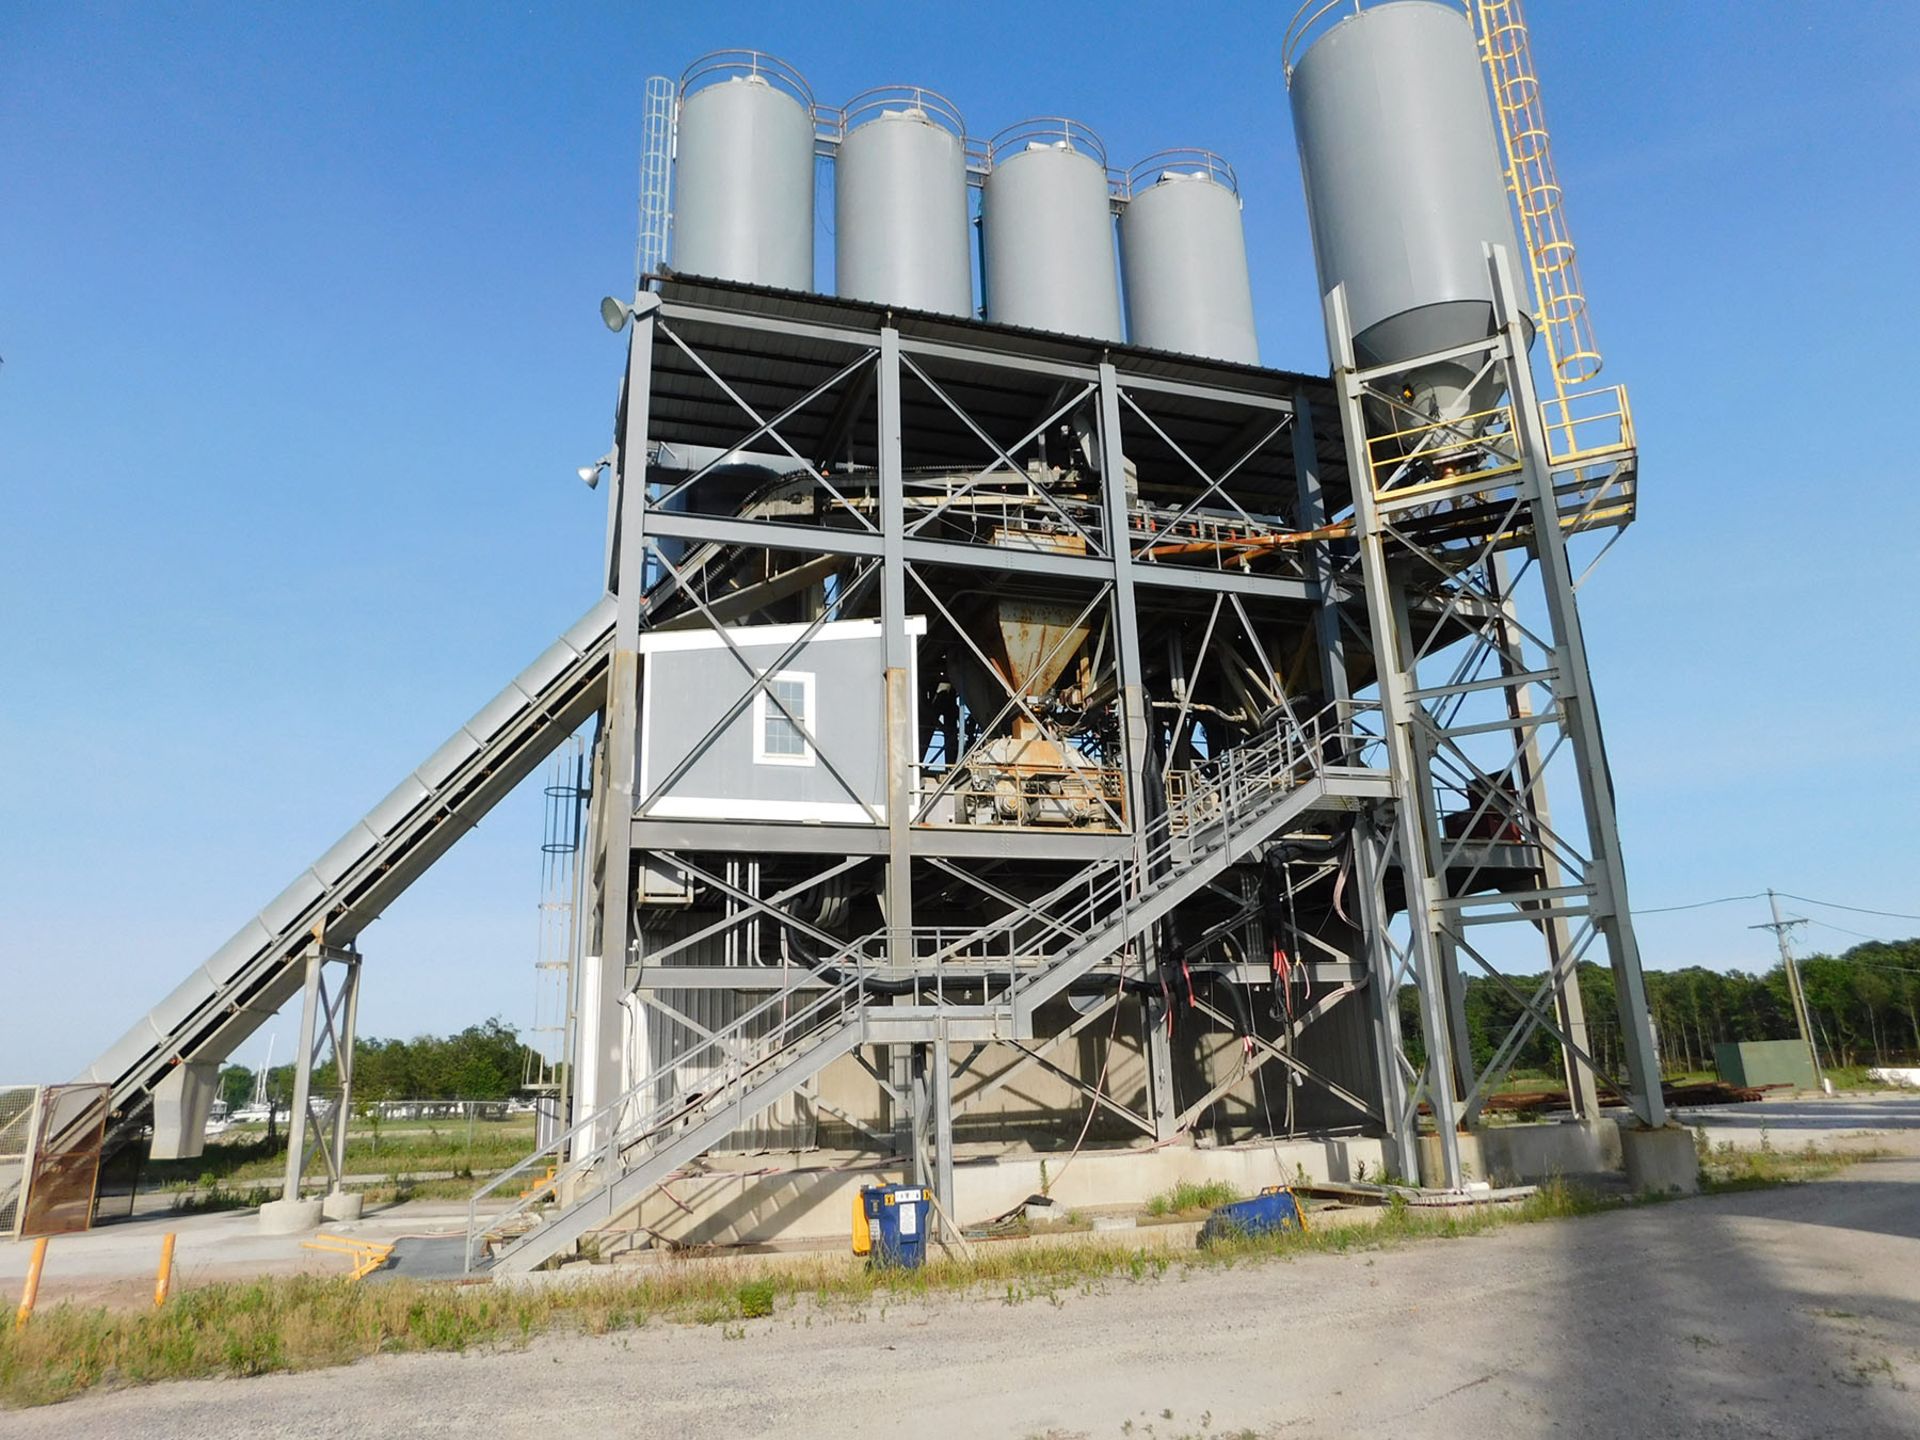 COMBINATION OF LOTS 2286 THRU 2290 - 2008 STANDLEY CONCRETE BATCH PLANT - Image 4 of 5